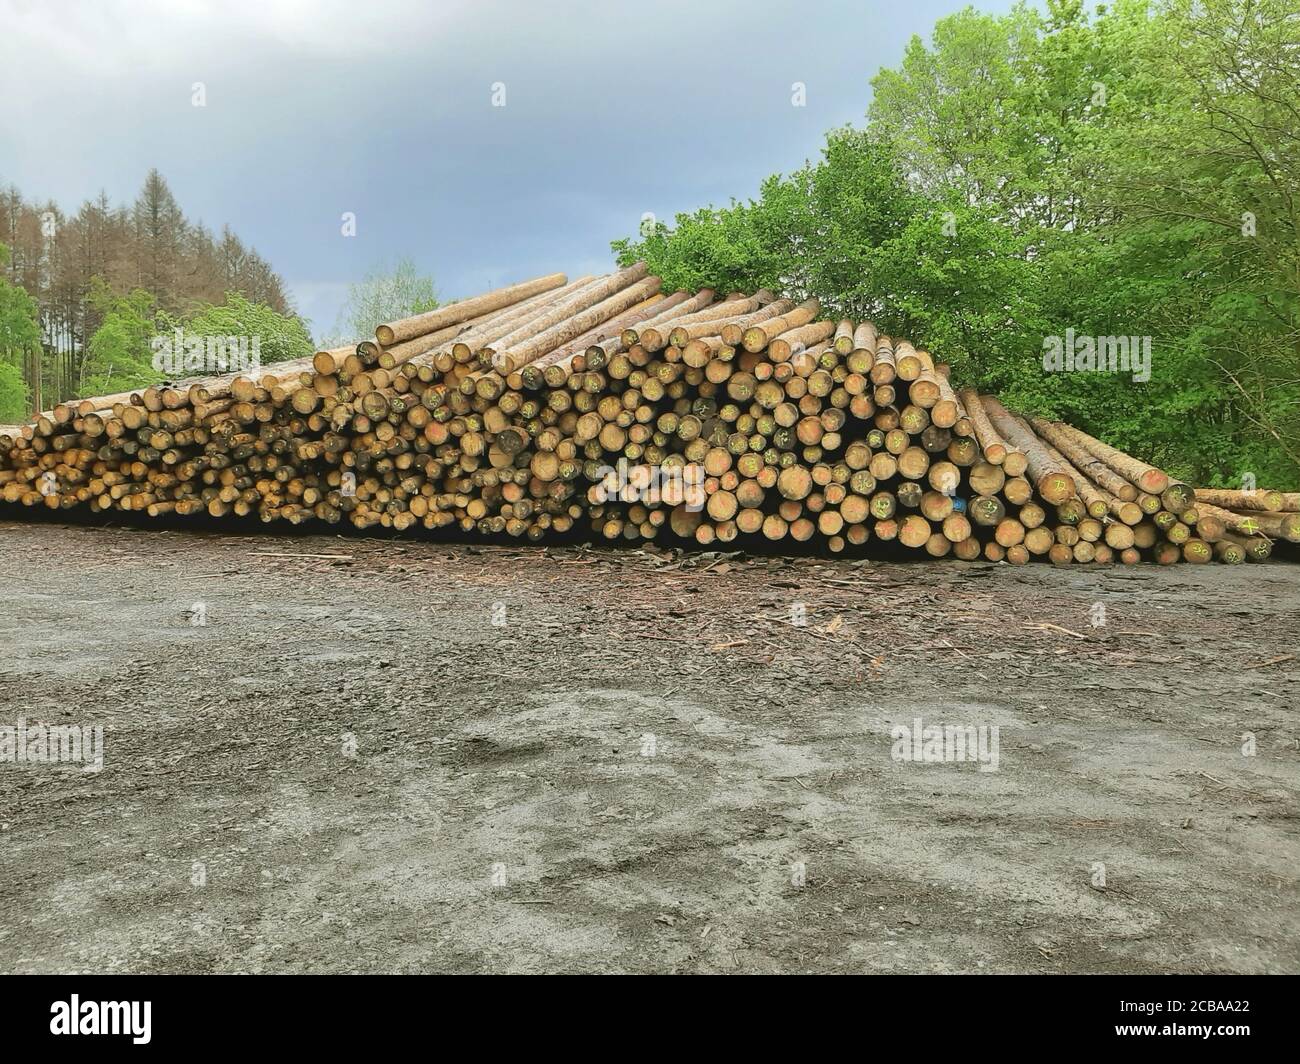 Norway spruce (Picea abies), dangerously stacked woodpile, Germany Stock Photo